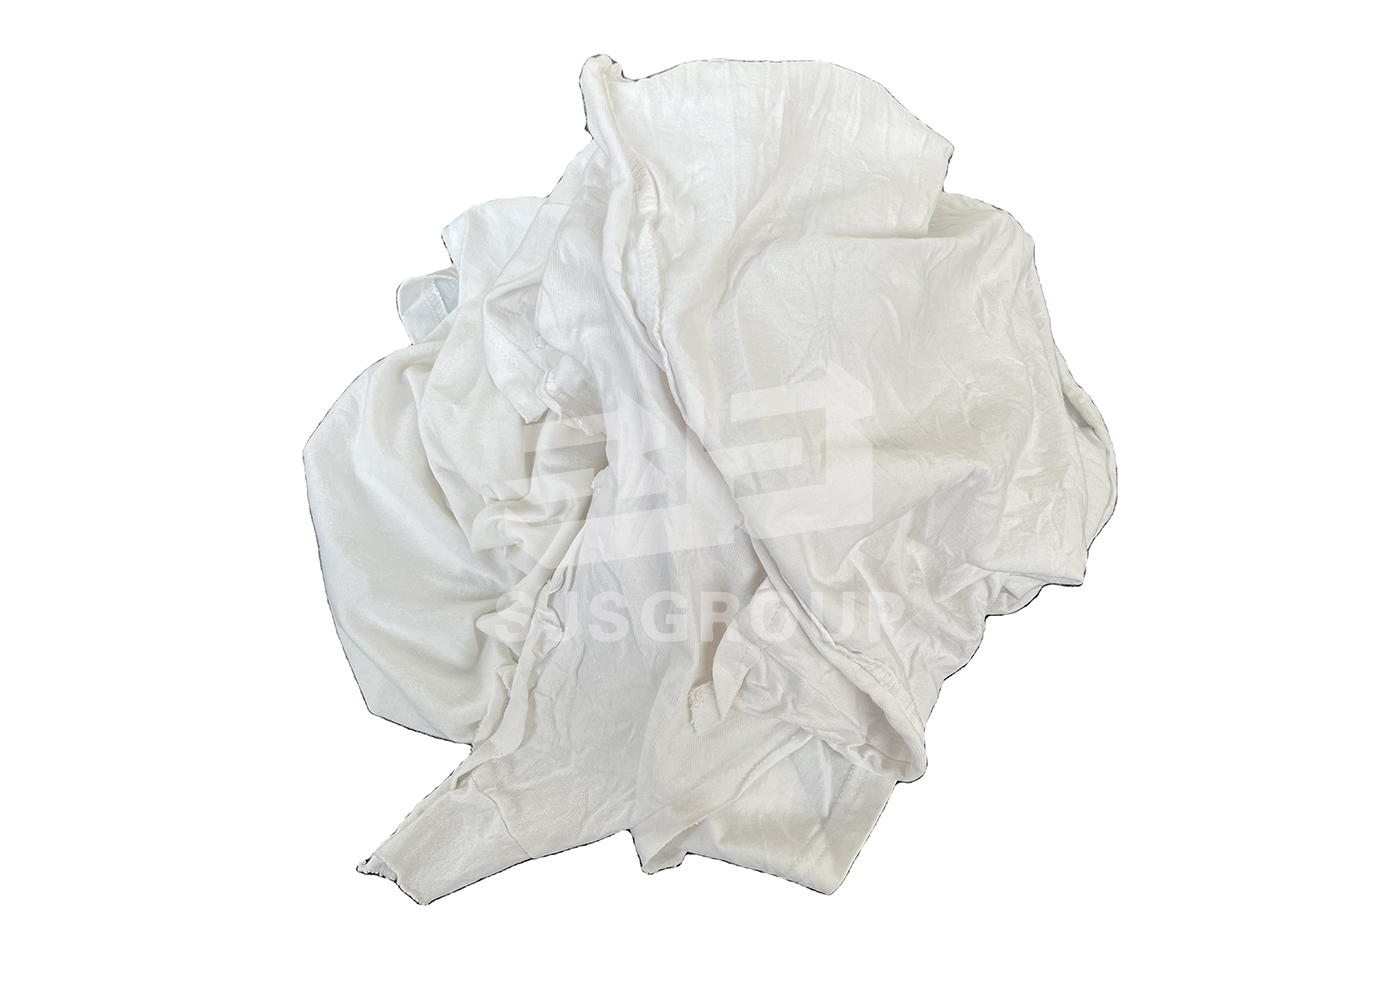 White Bed Sheet Cotton Rags (Standard Size), White Bed Sheet Rags